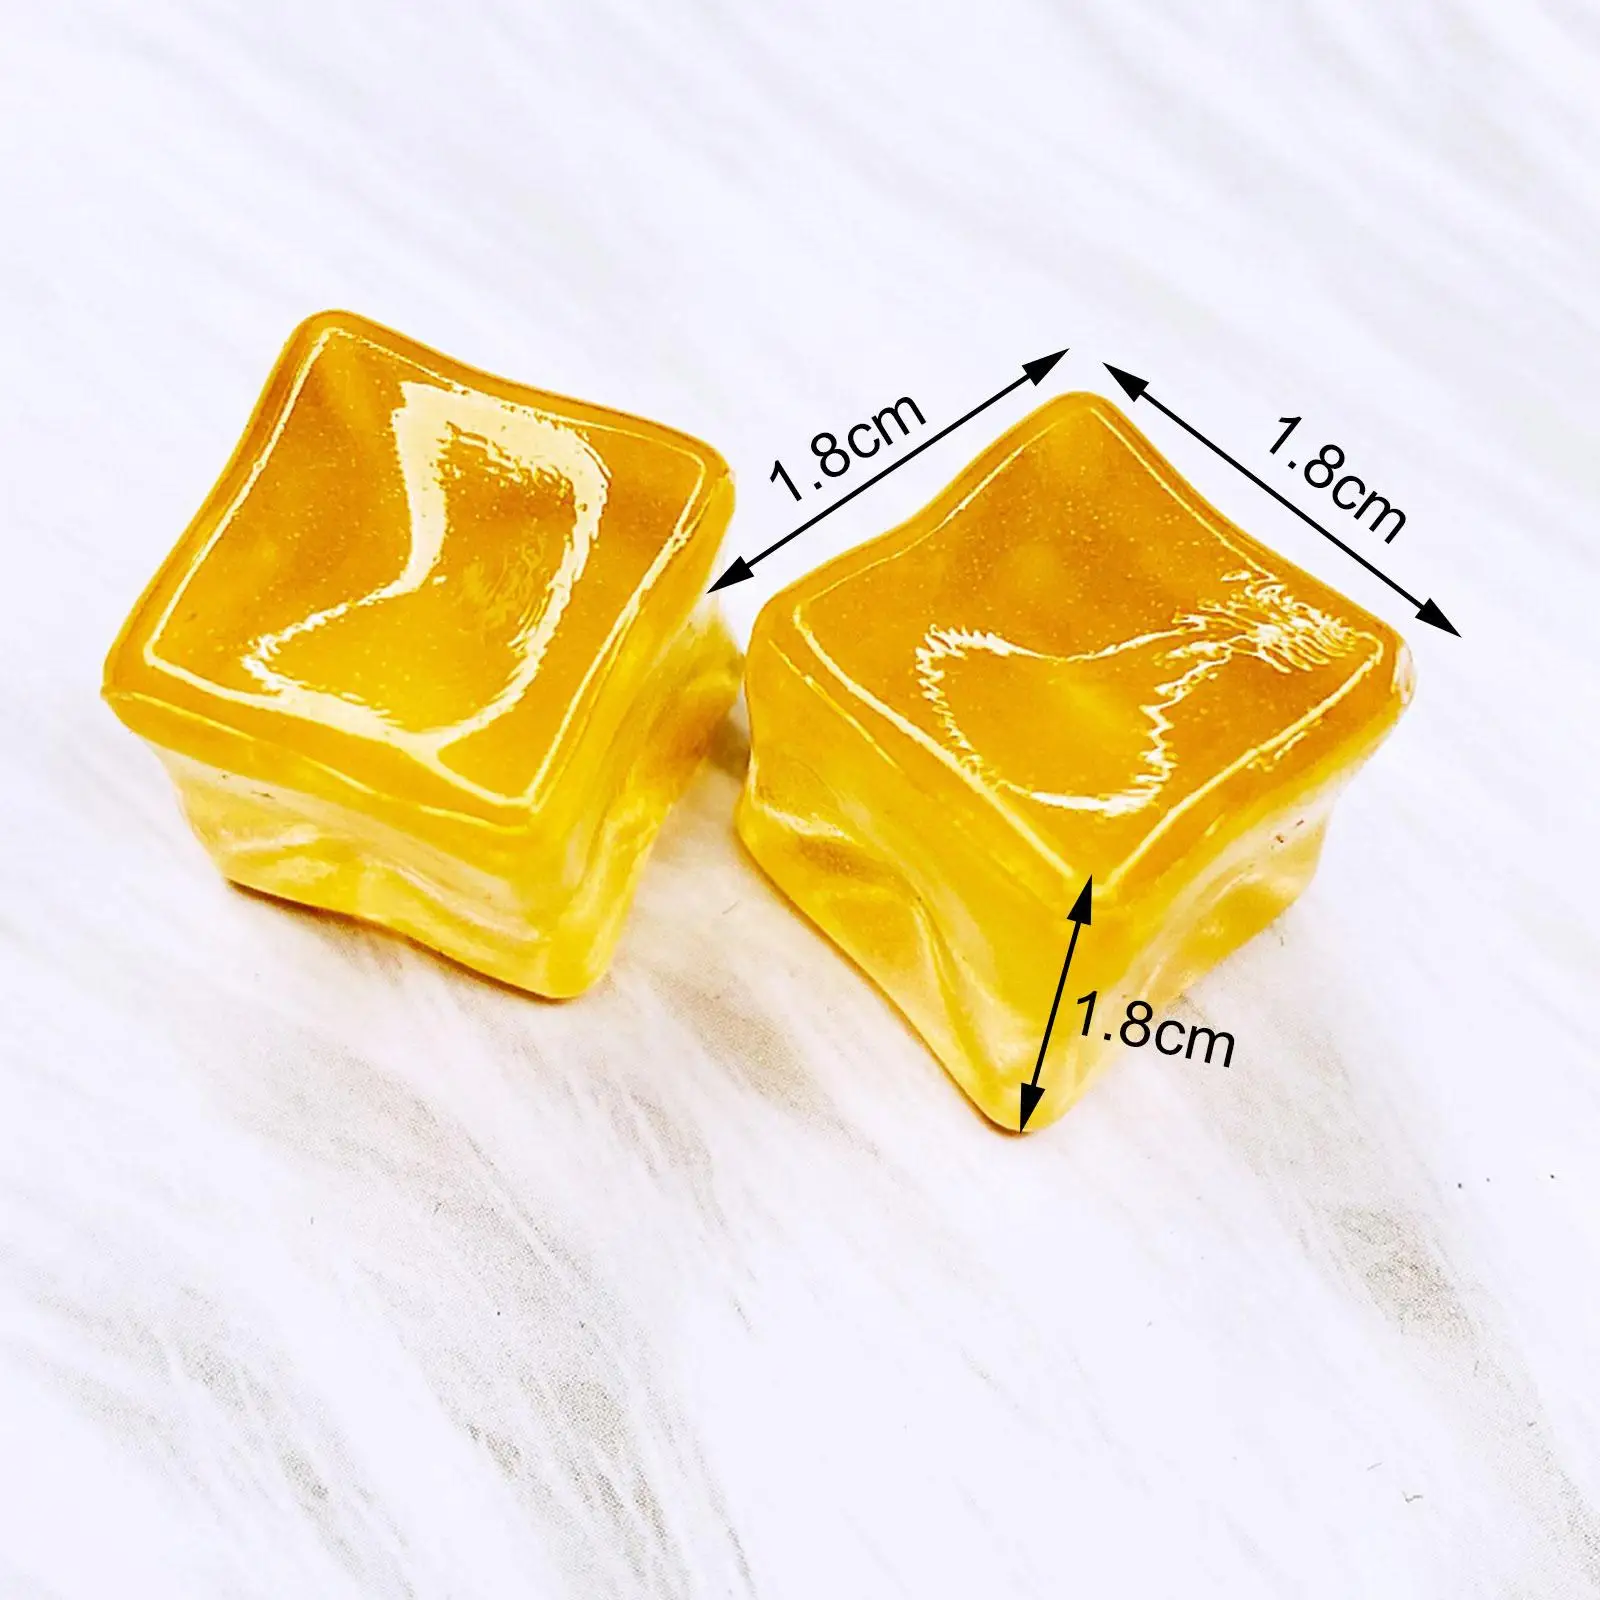 184Pcs Square Ice Cubes Photography Props Arts Acrylic Ice Cubes for Events Swimming Pool Decoration Party Favor Fish Tank Home